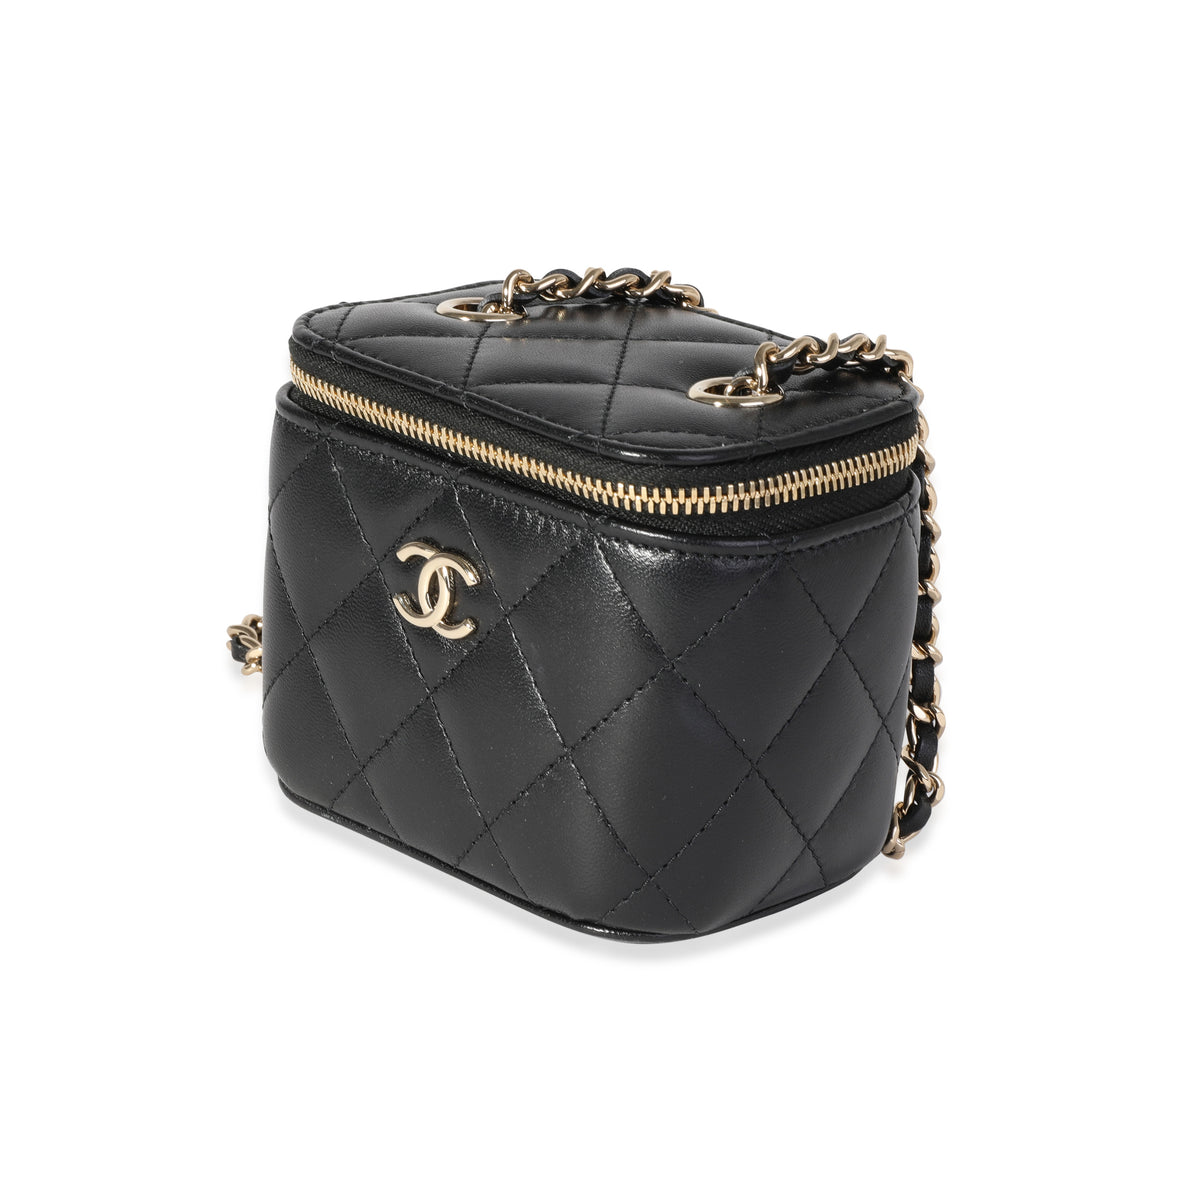 Chanel Multicolor Quilted Lambskin Multi-Pocket Zip Case, myGemma